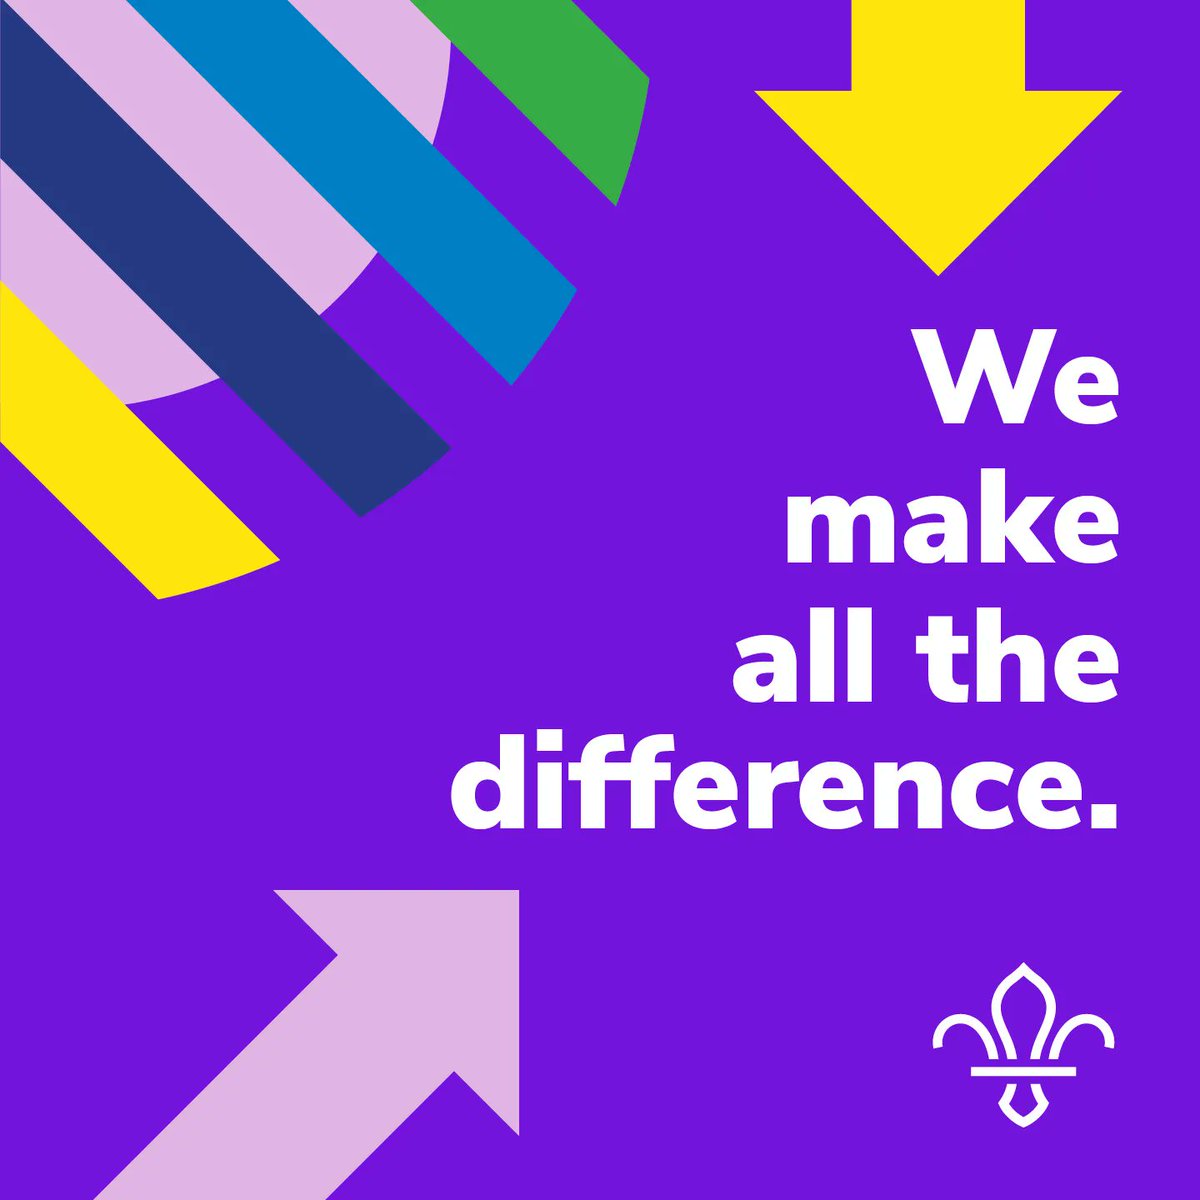 We're Scouts and everyone's welcome here. The top three reasons people volunteer for Scouts! 1. ‘I wanted to improve things and help people.’ 2. ‘It would give me a chance to use my existing skills.’ 3. ‘Someone ask me to help.’ #LancashireHour